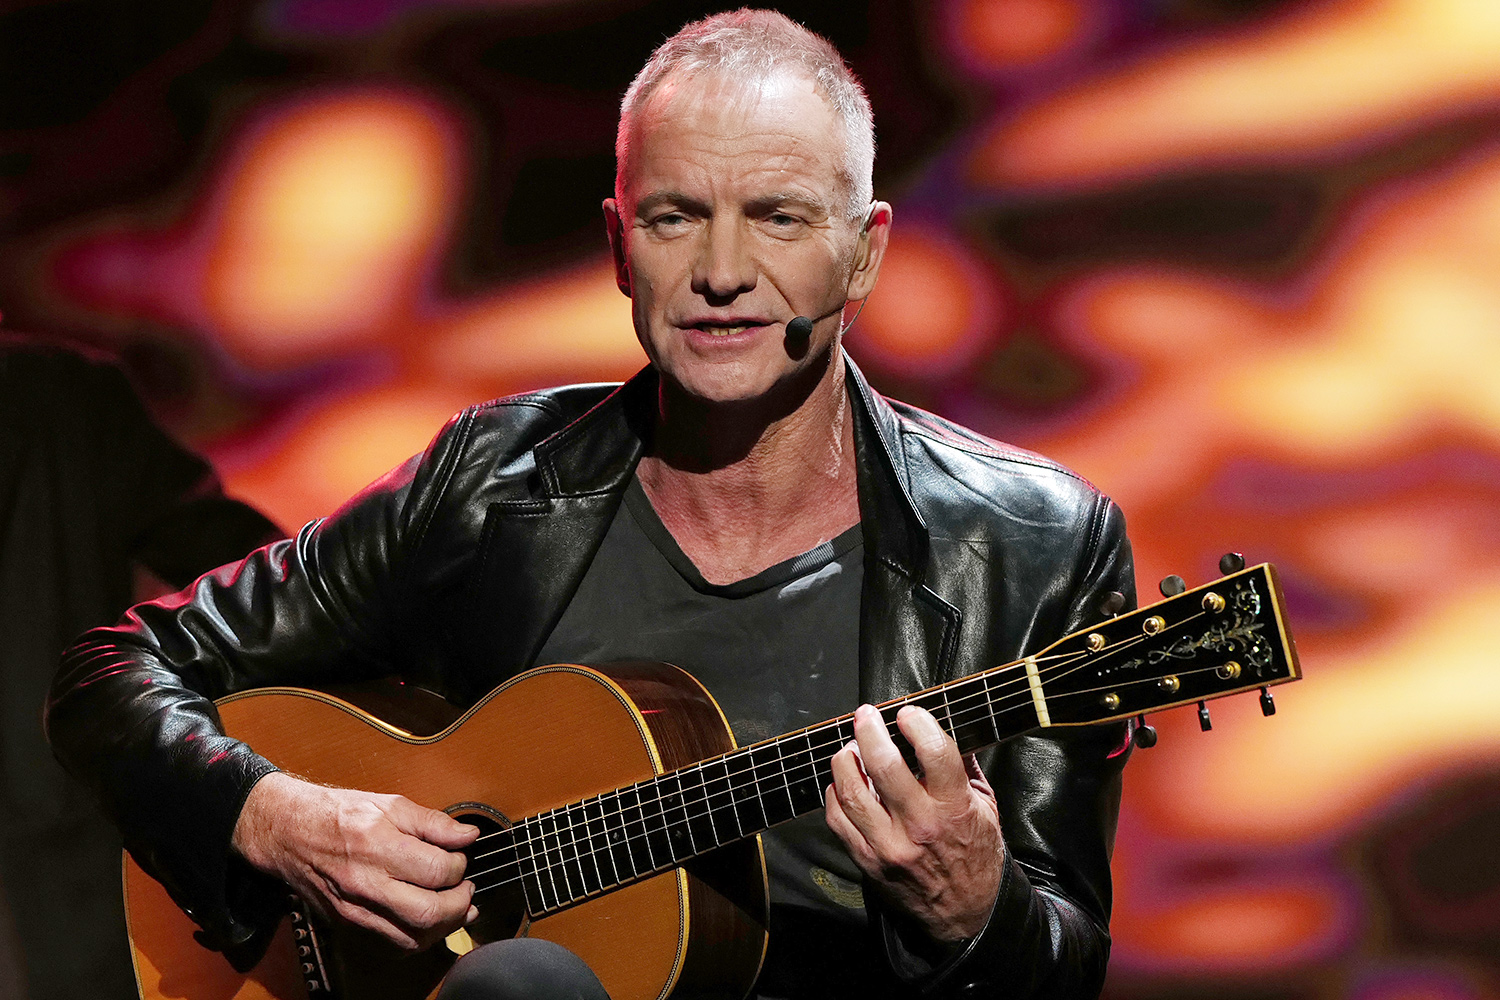 Sting sells his music catalogue of songs to Universal Music Group